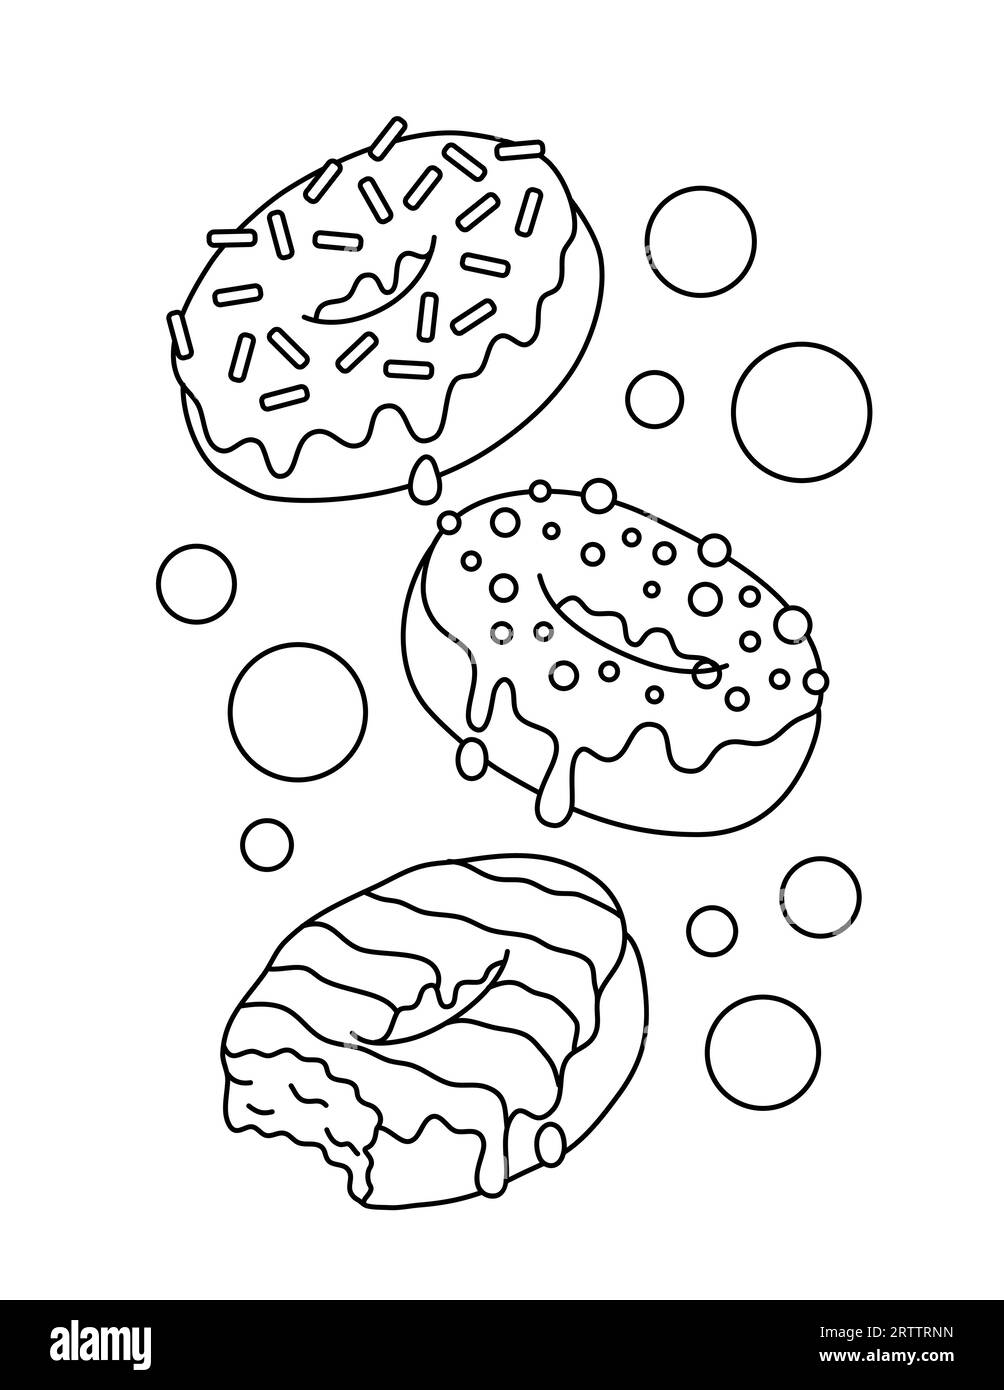 Cute Floating Donut Coloring Page Stock Vector